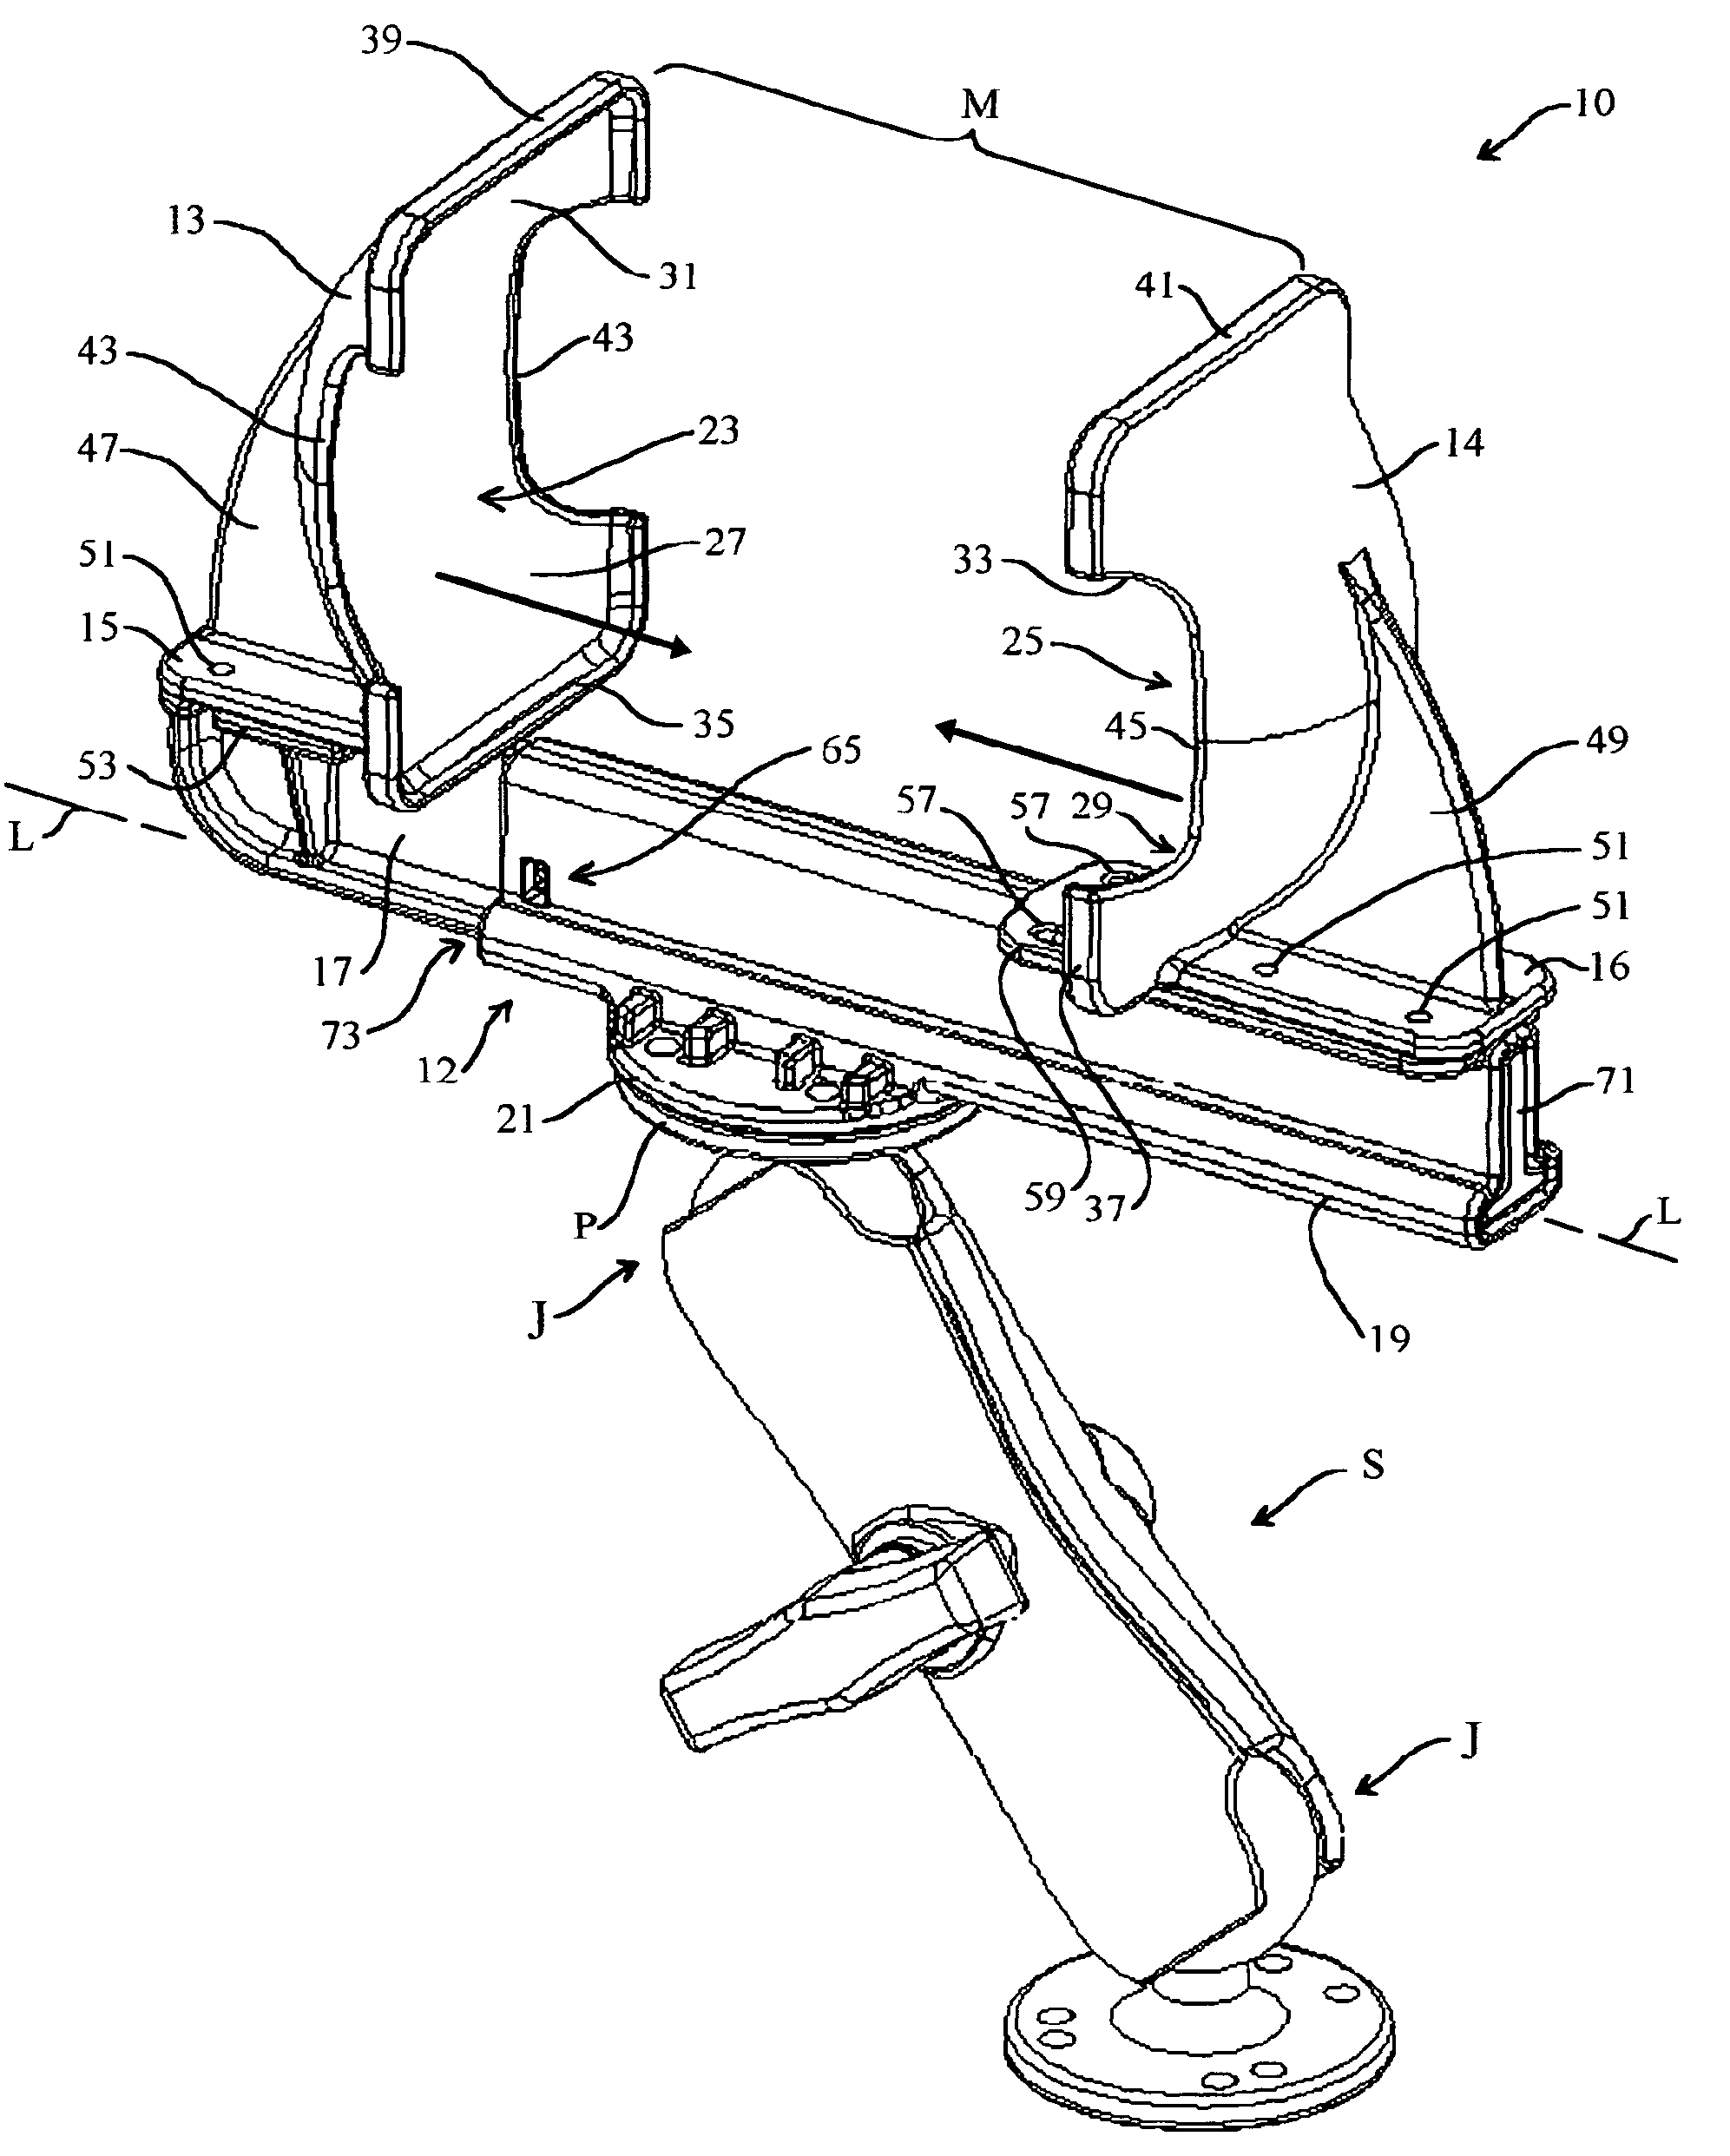 Thumb release mounting apparatus